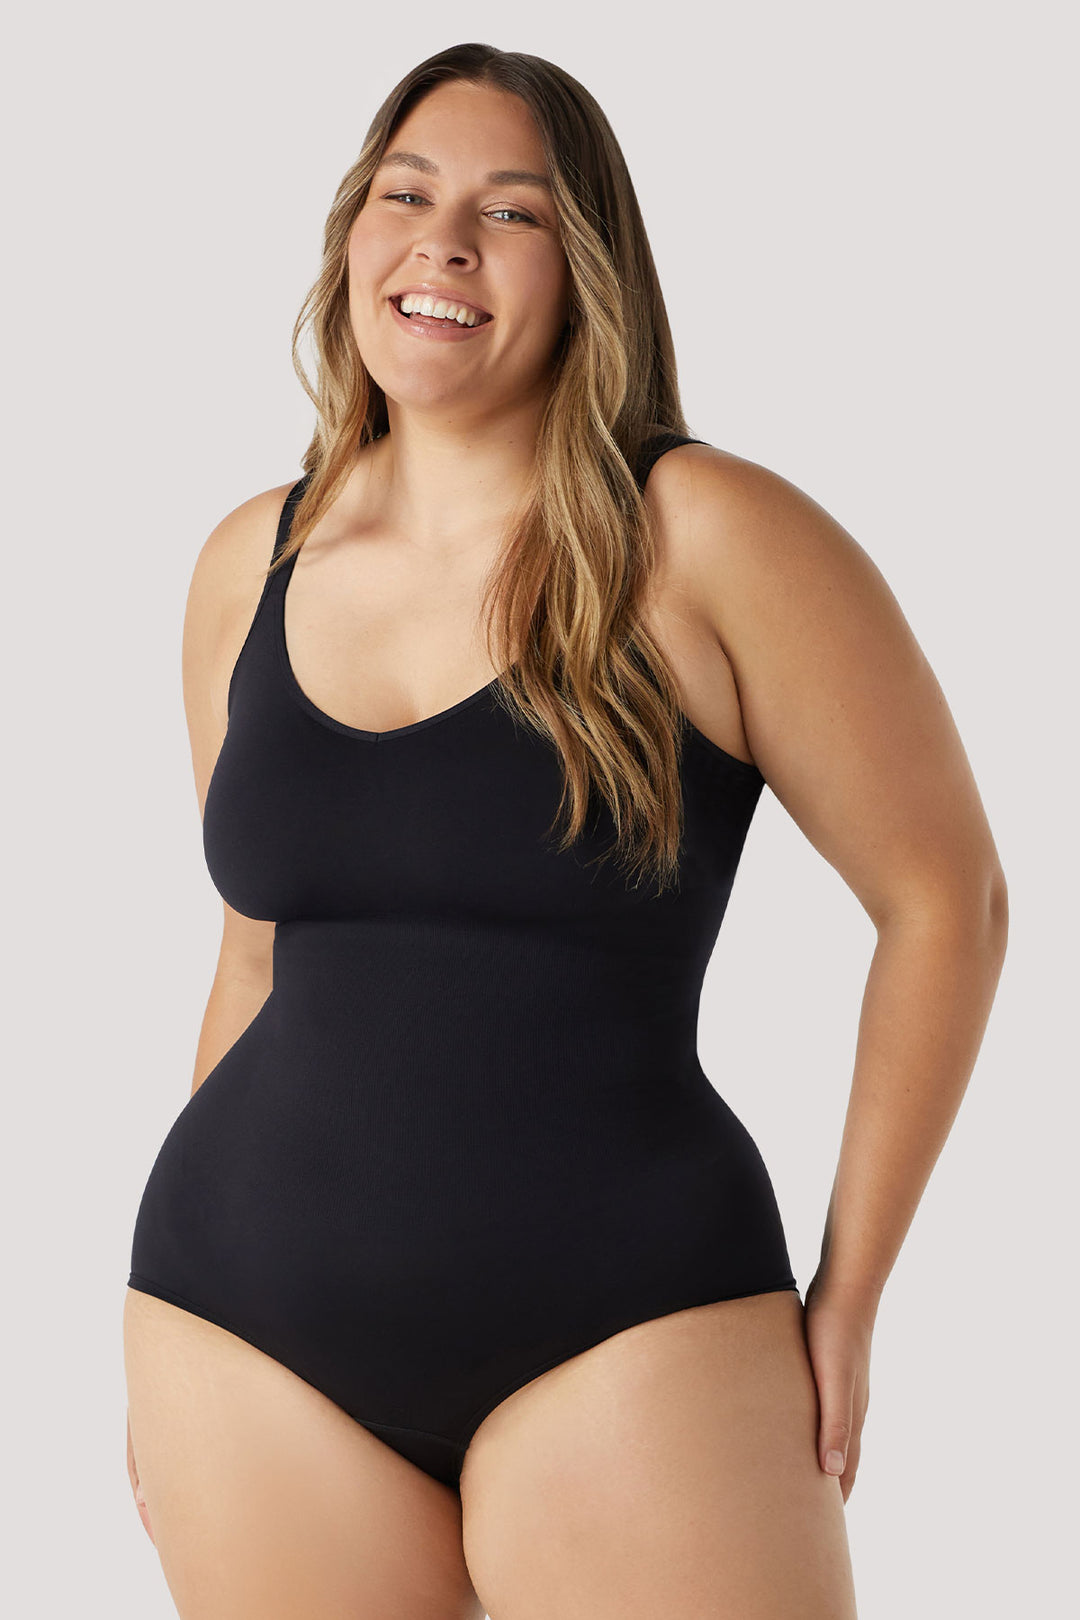 Shaping stretchy firming Bodysuit | Bella Bodies Australia | Black | Front